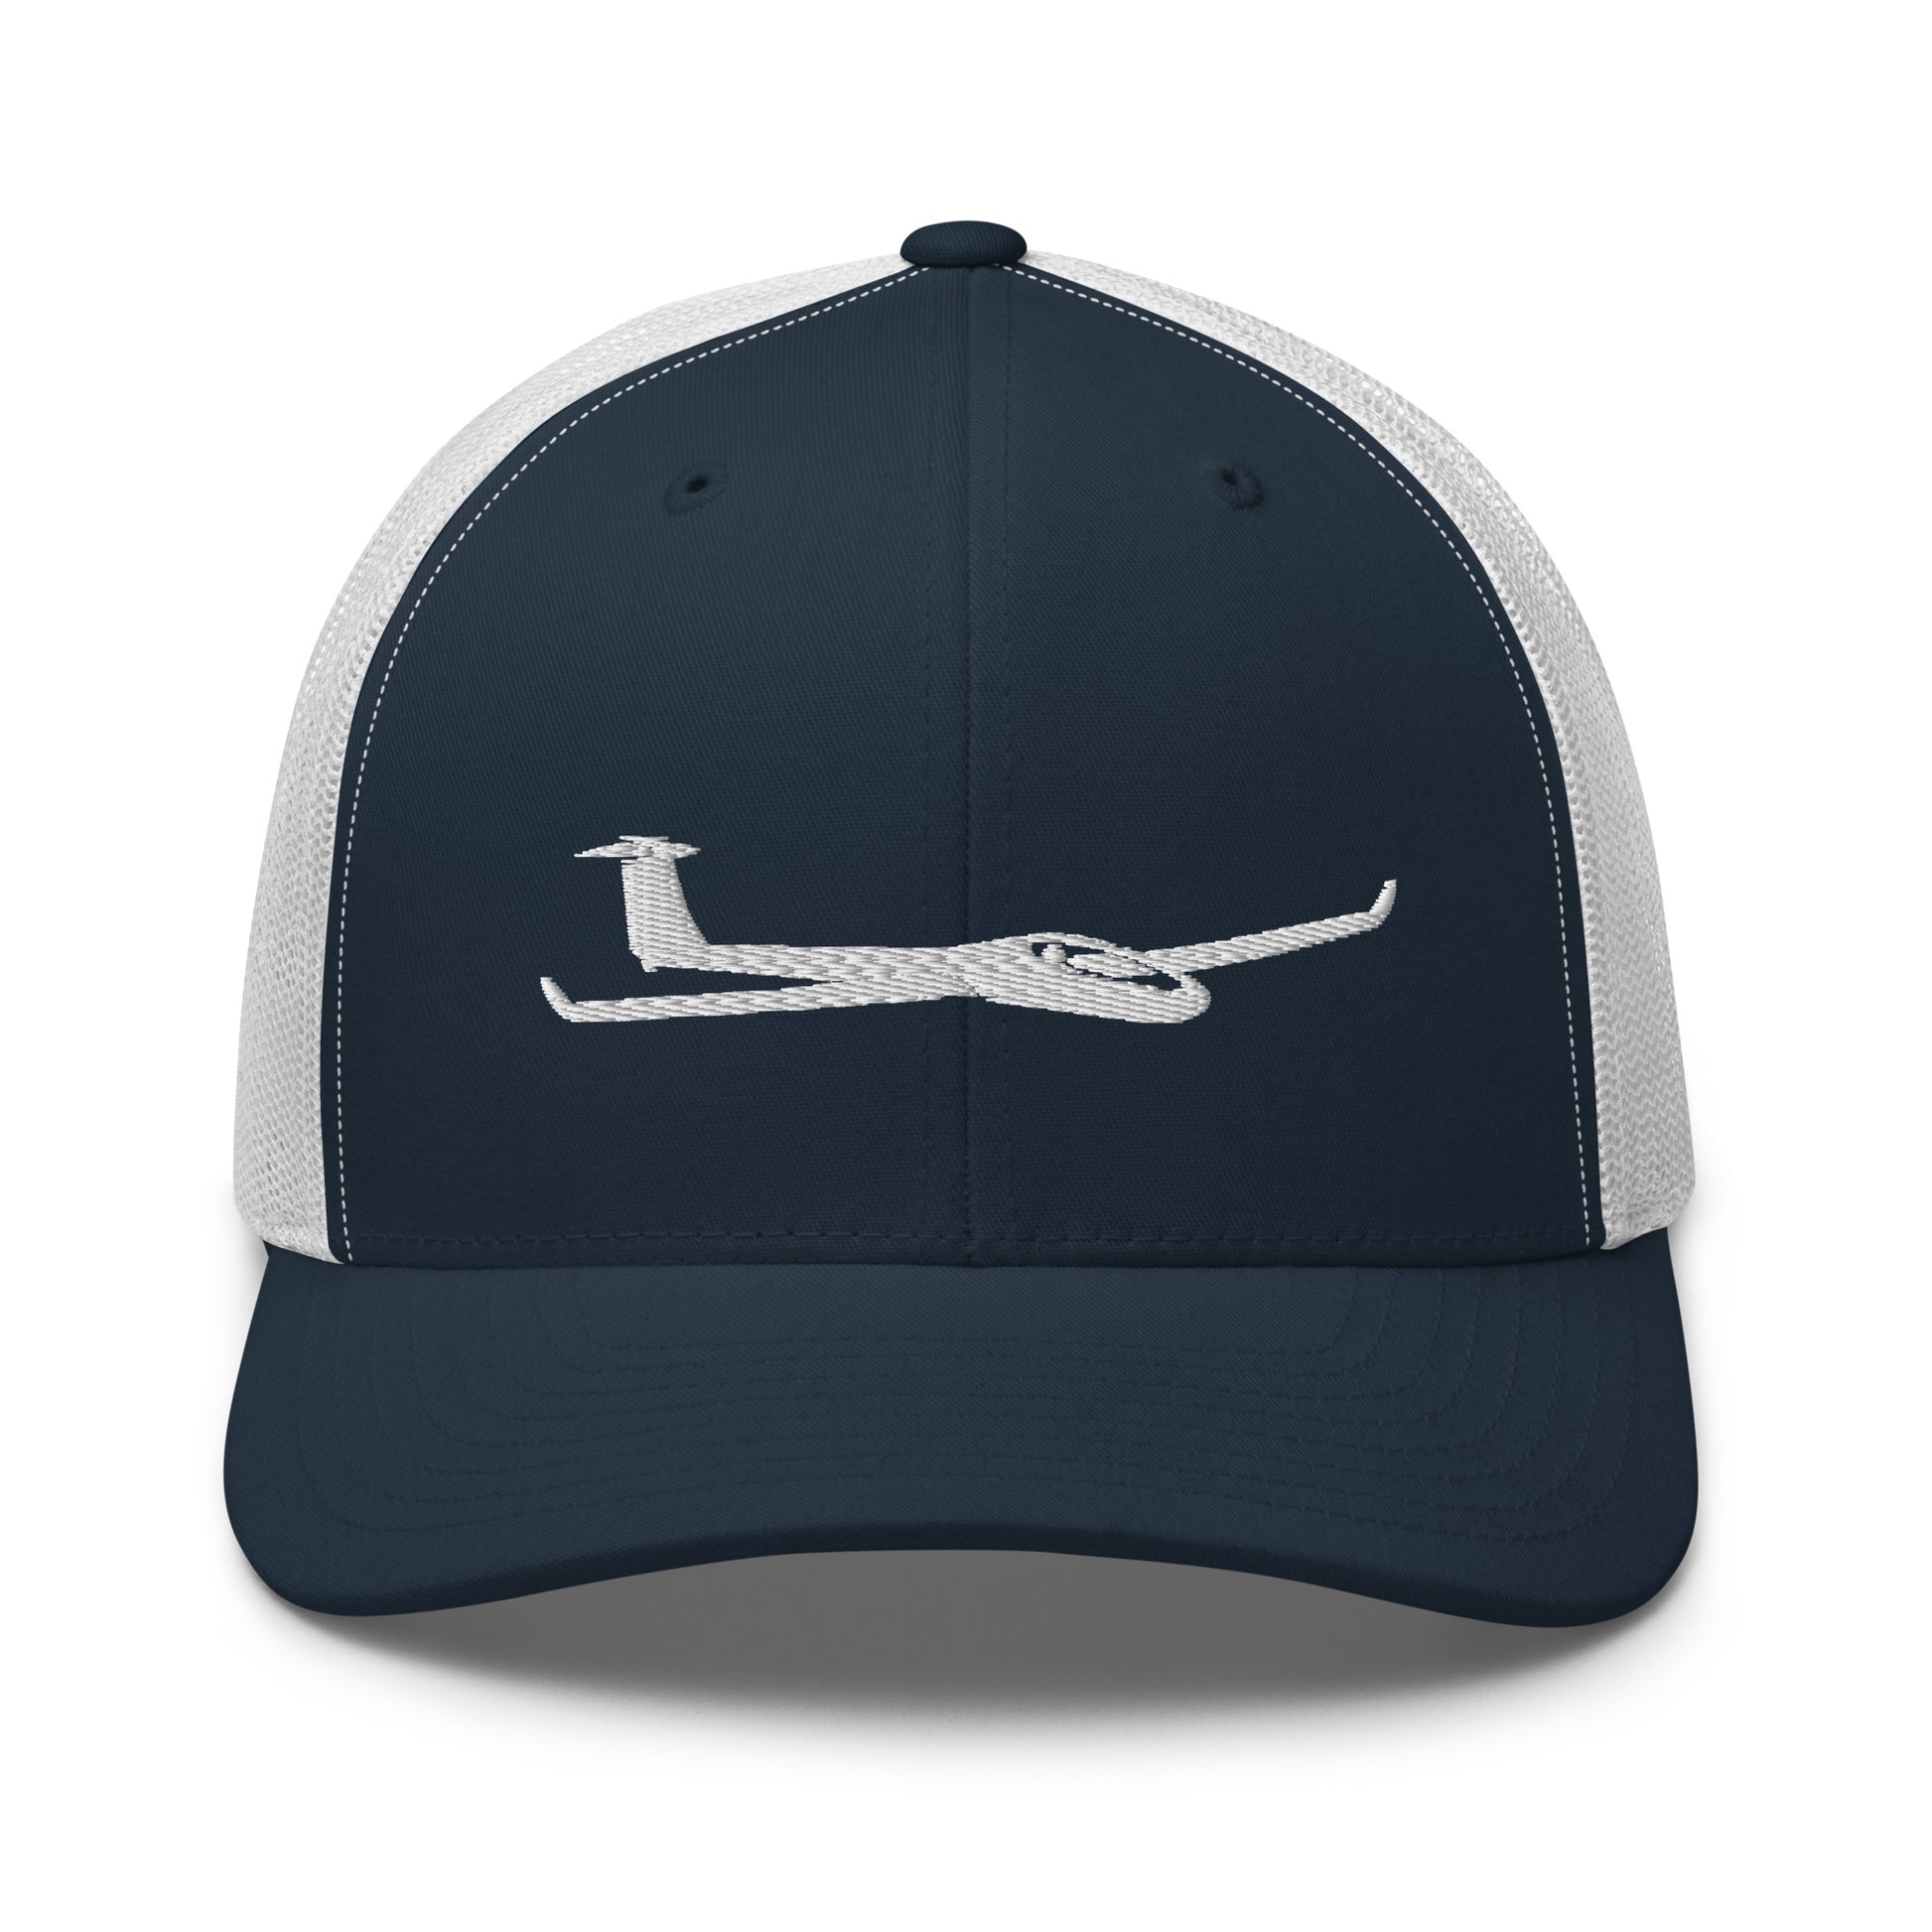 Glider Trucker Hat.  A blue and white Yupoong 6606 hat with a white glider embroidered on the front panel.